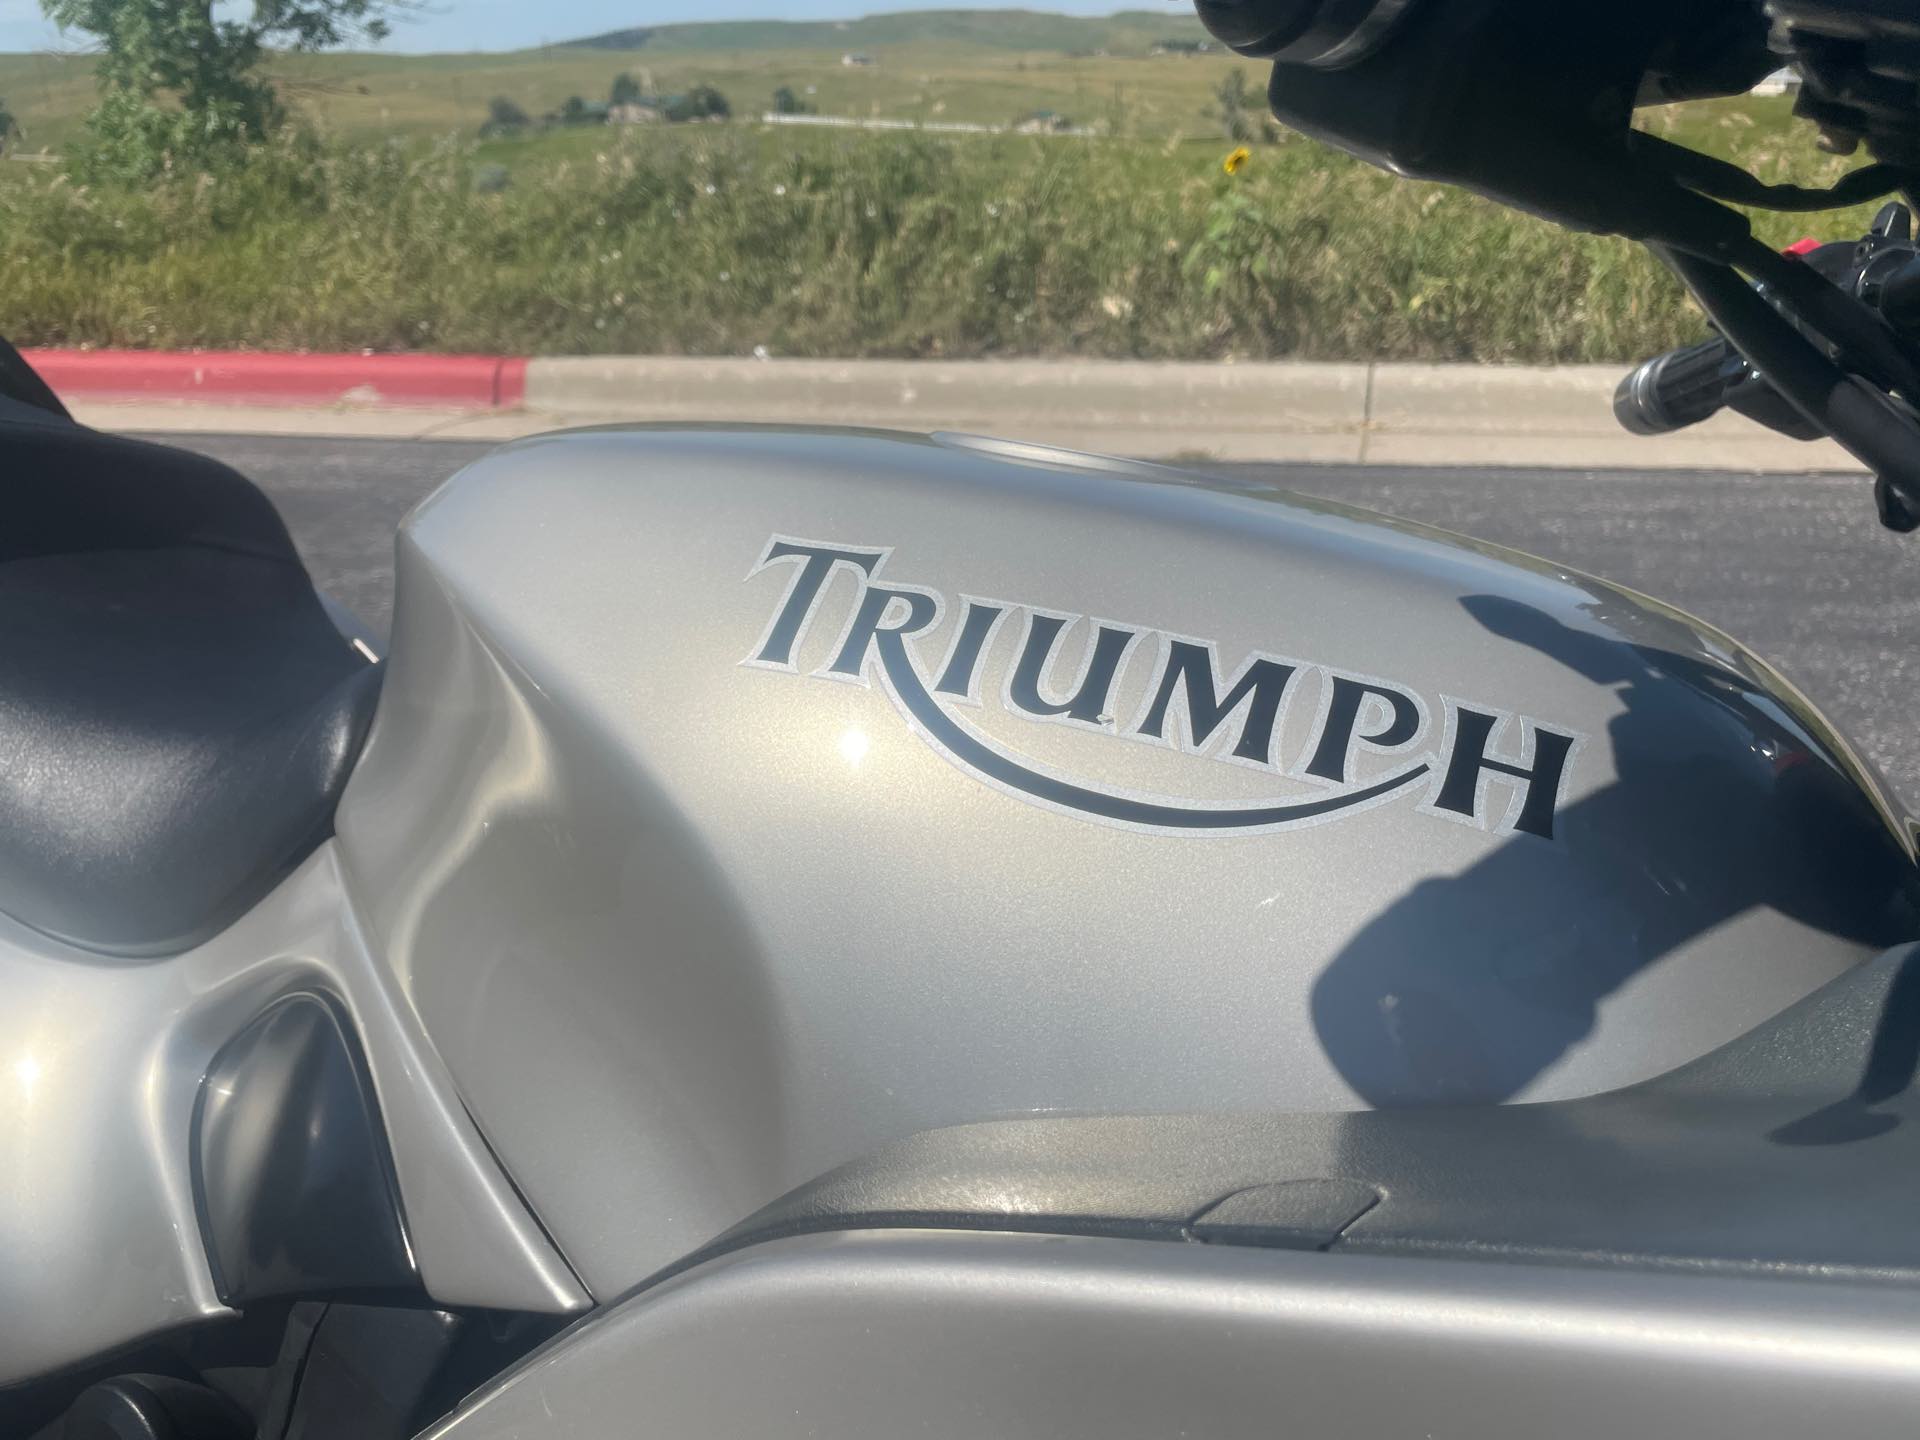 1998 Triumph Trophy 900 at Mount Rushmore Motorsports